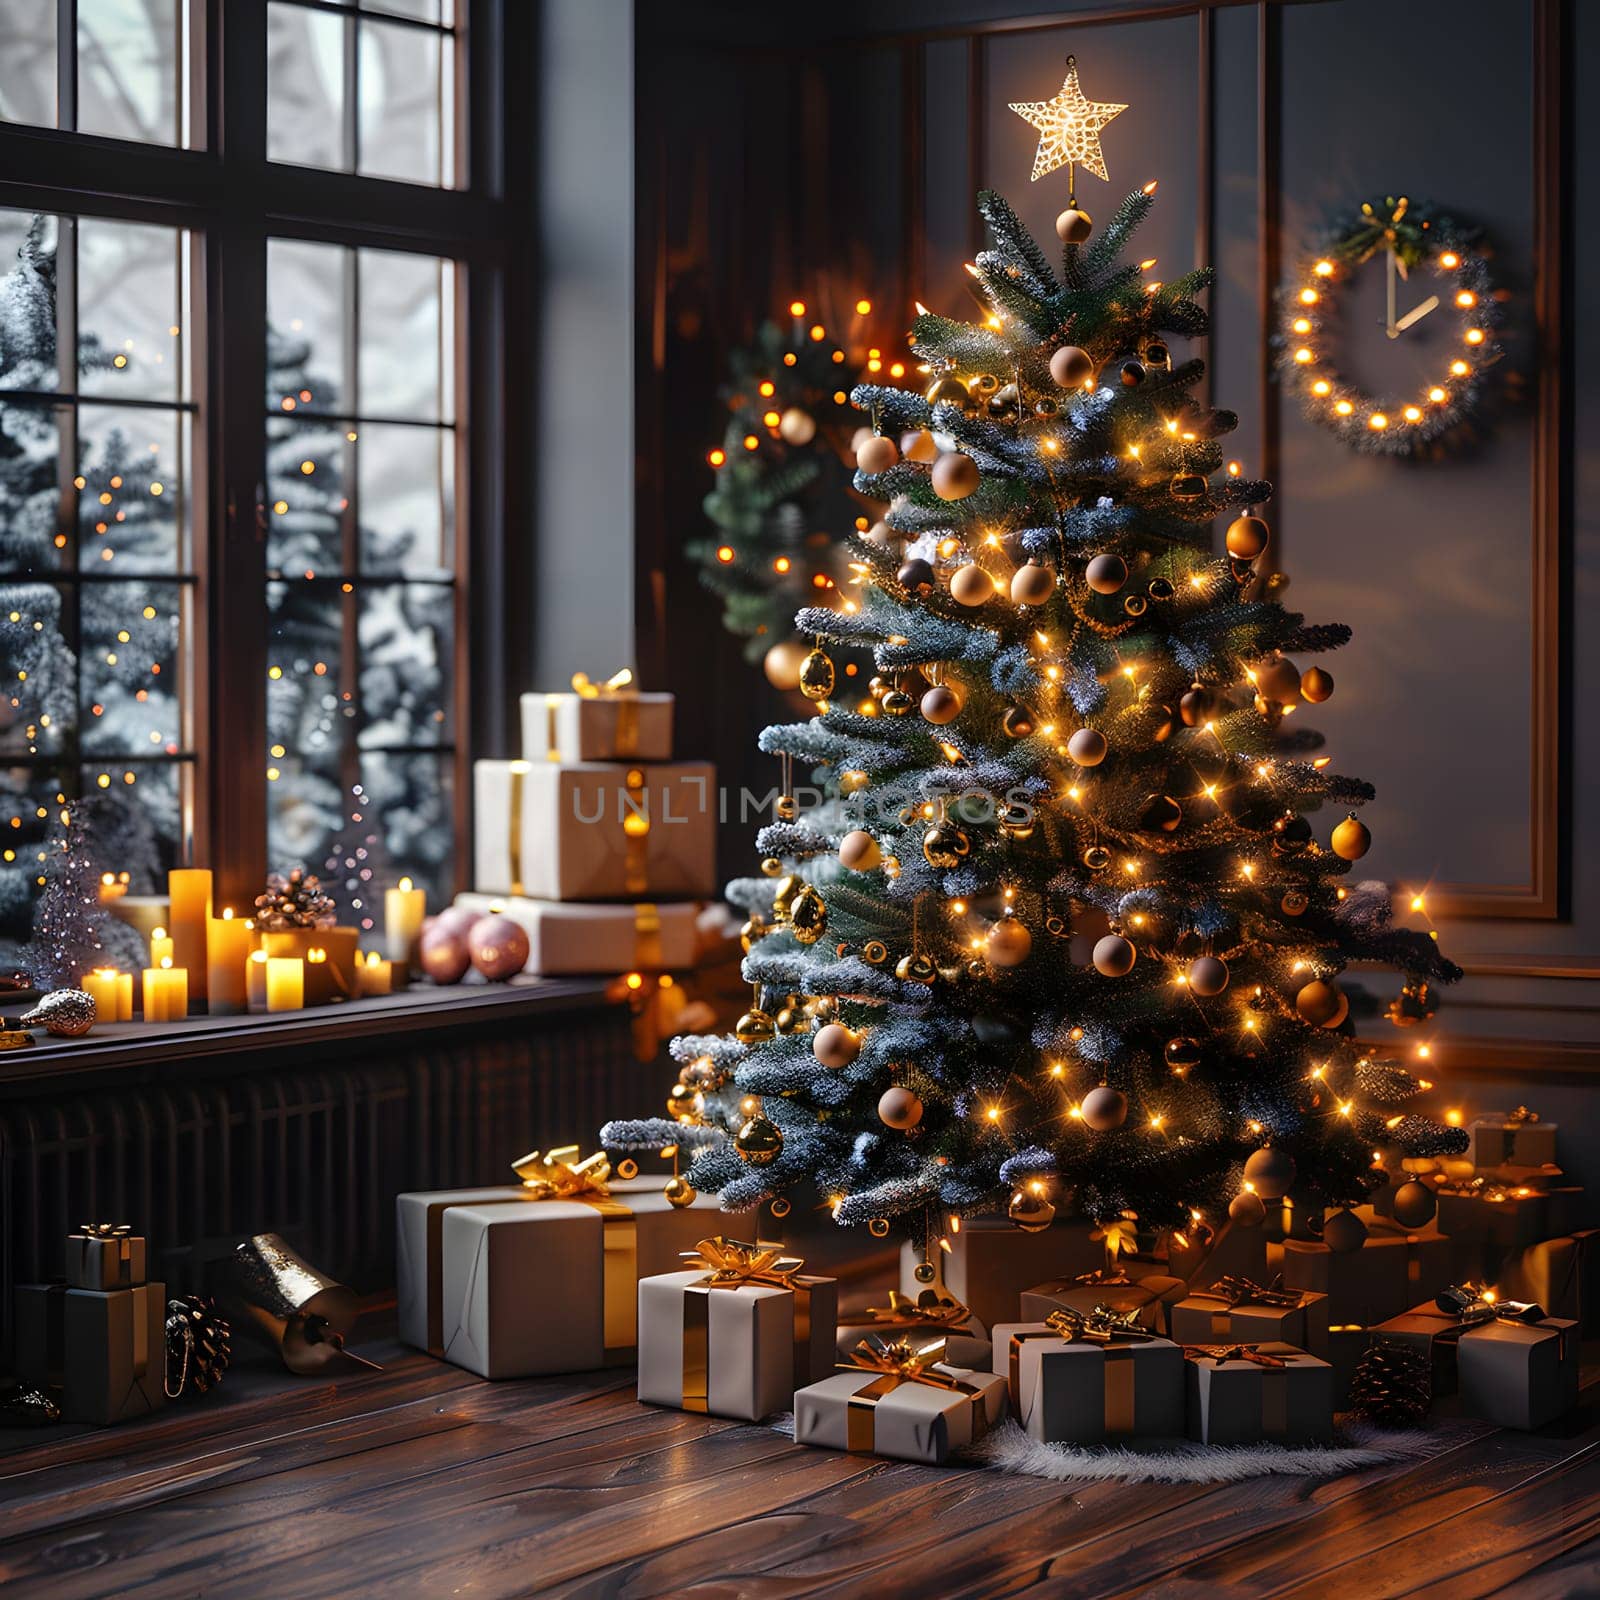 A beautifully decorated Christmas tree stands in the center of the room, adorned with holiday ornaments and surrounded by gifts. The festive display adds a touch of cheer to the interior design